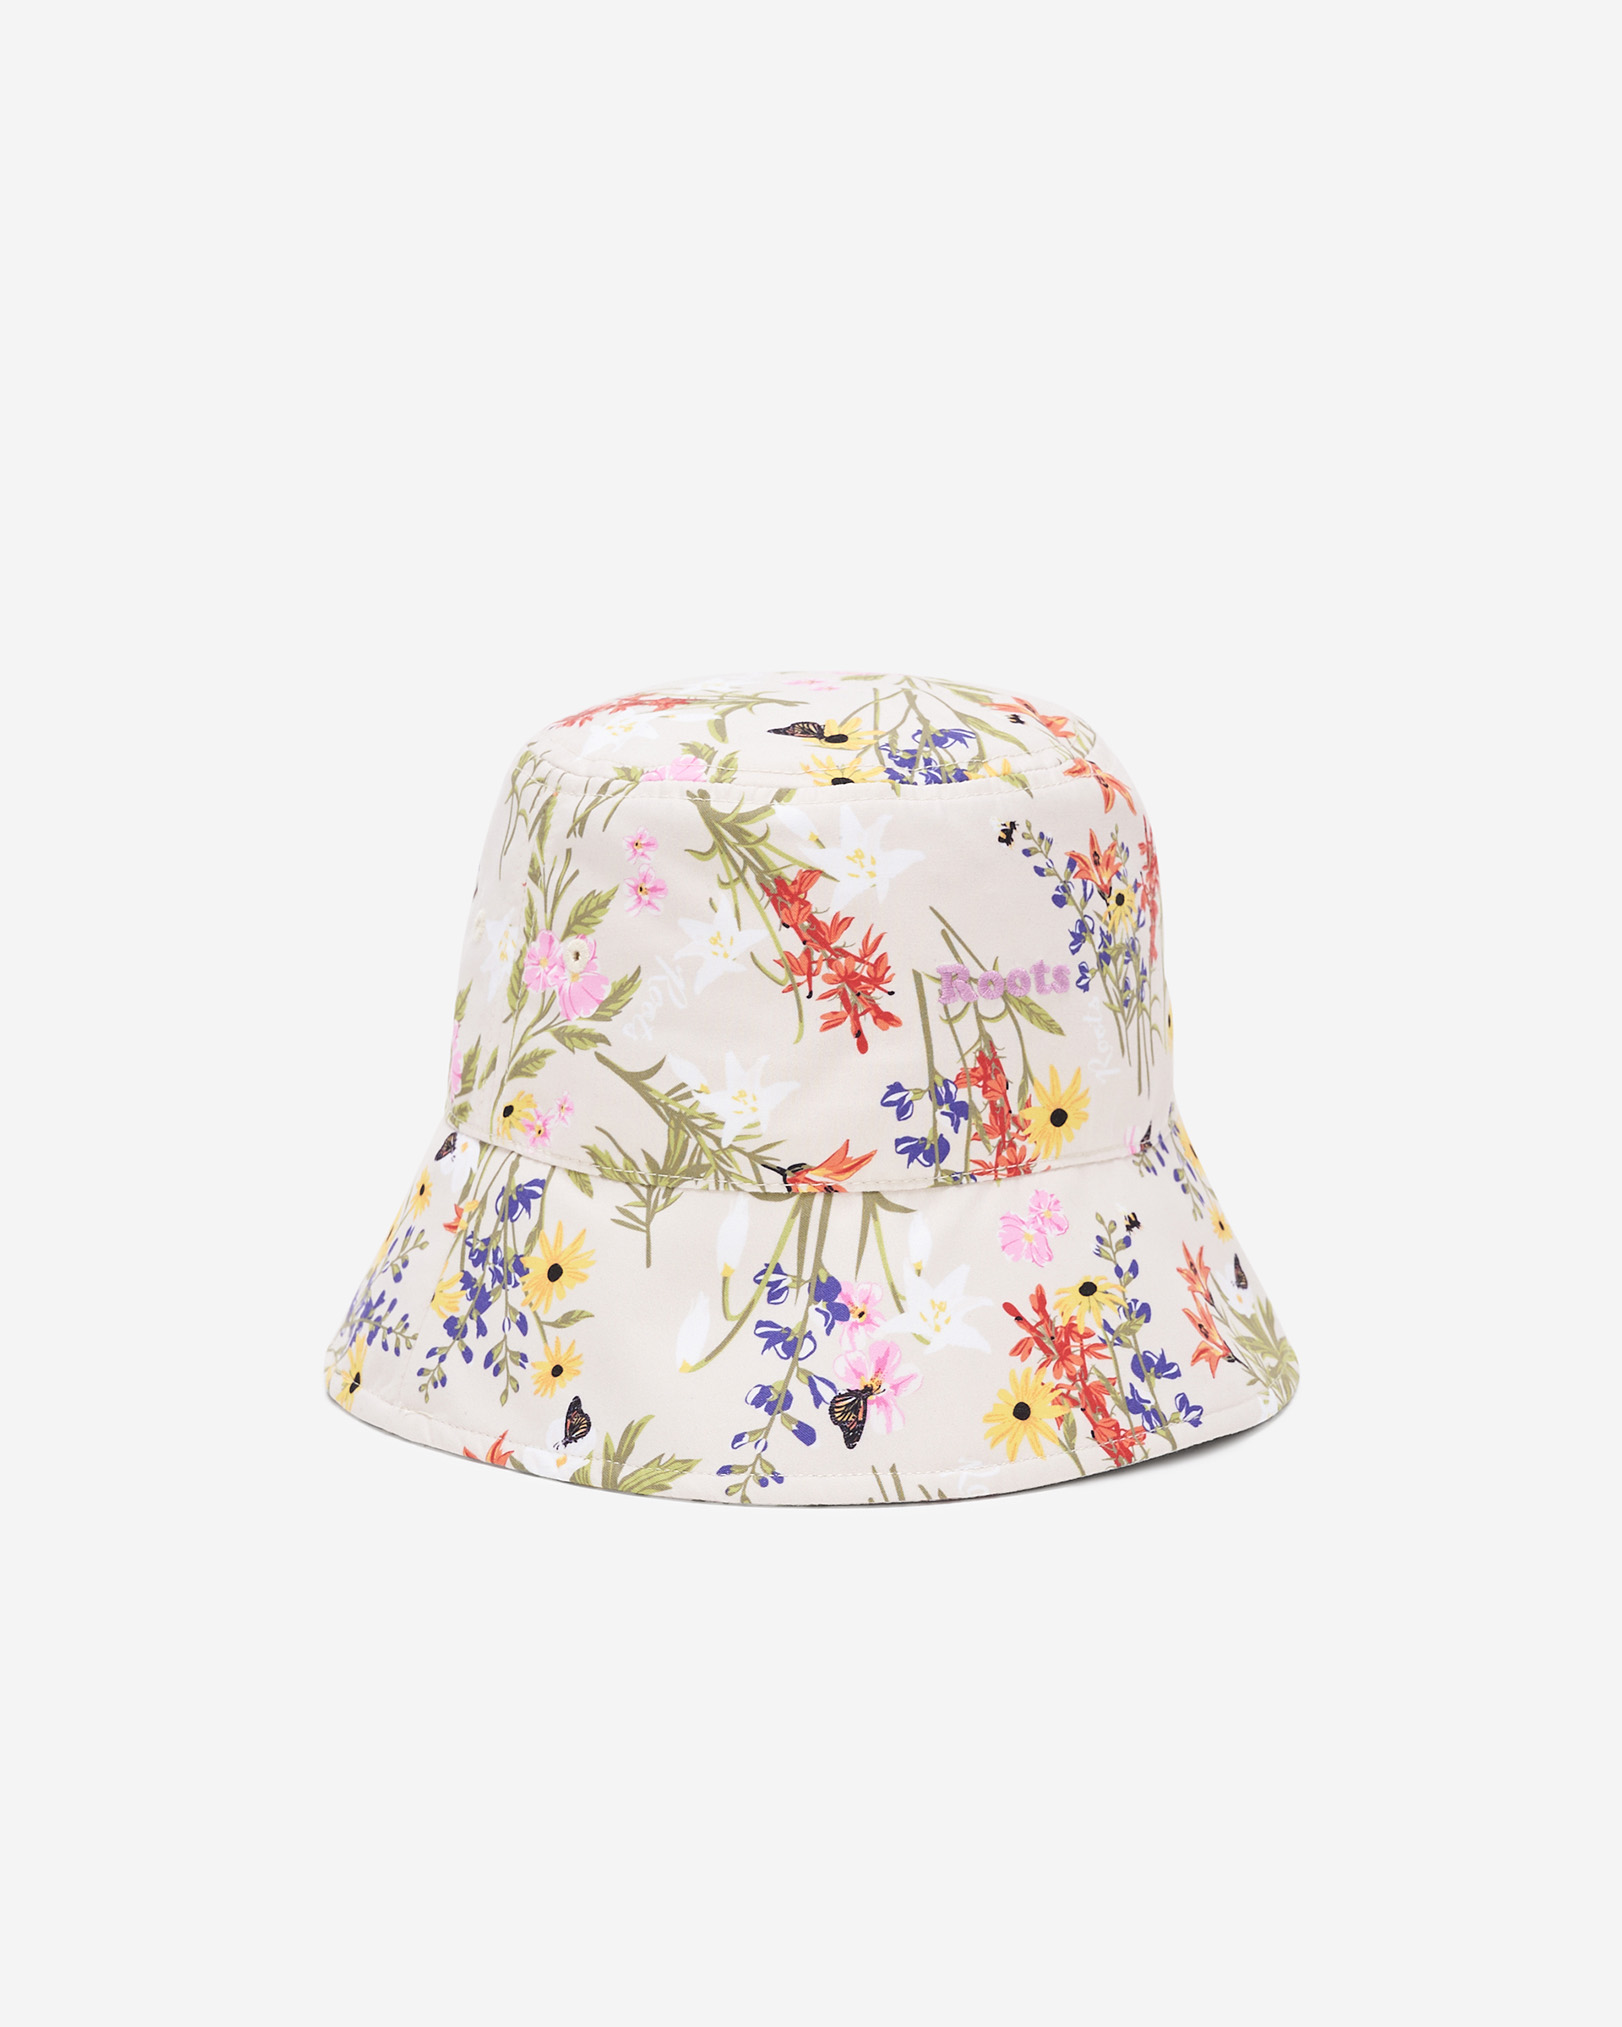 Roots Kids Floral Bucket Hat in Assorted